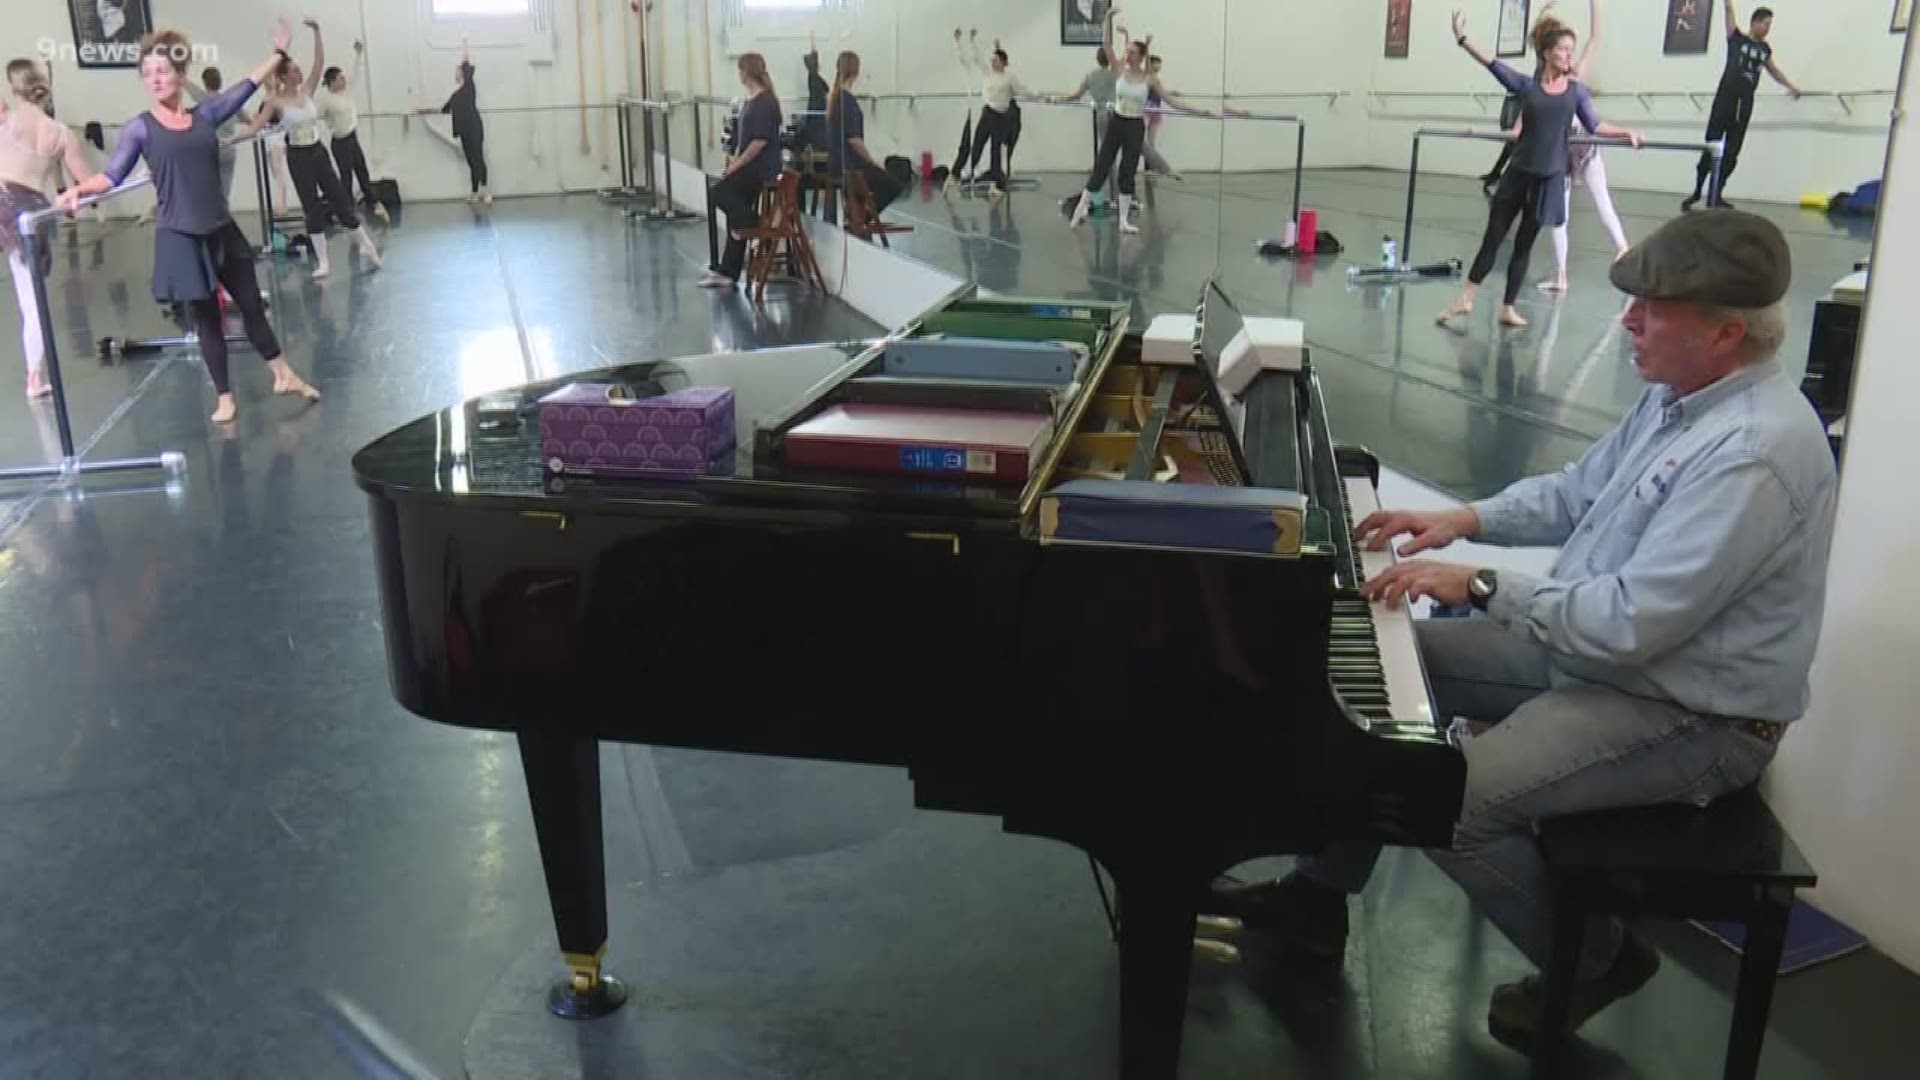 The pressure of rising rent is hitting a Denver dance studio, but they aren't bowing out yet.